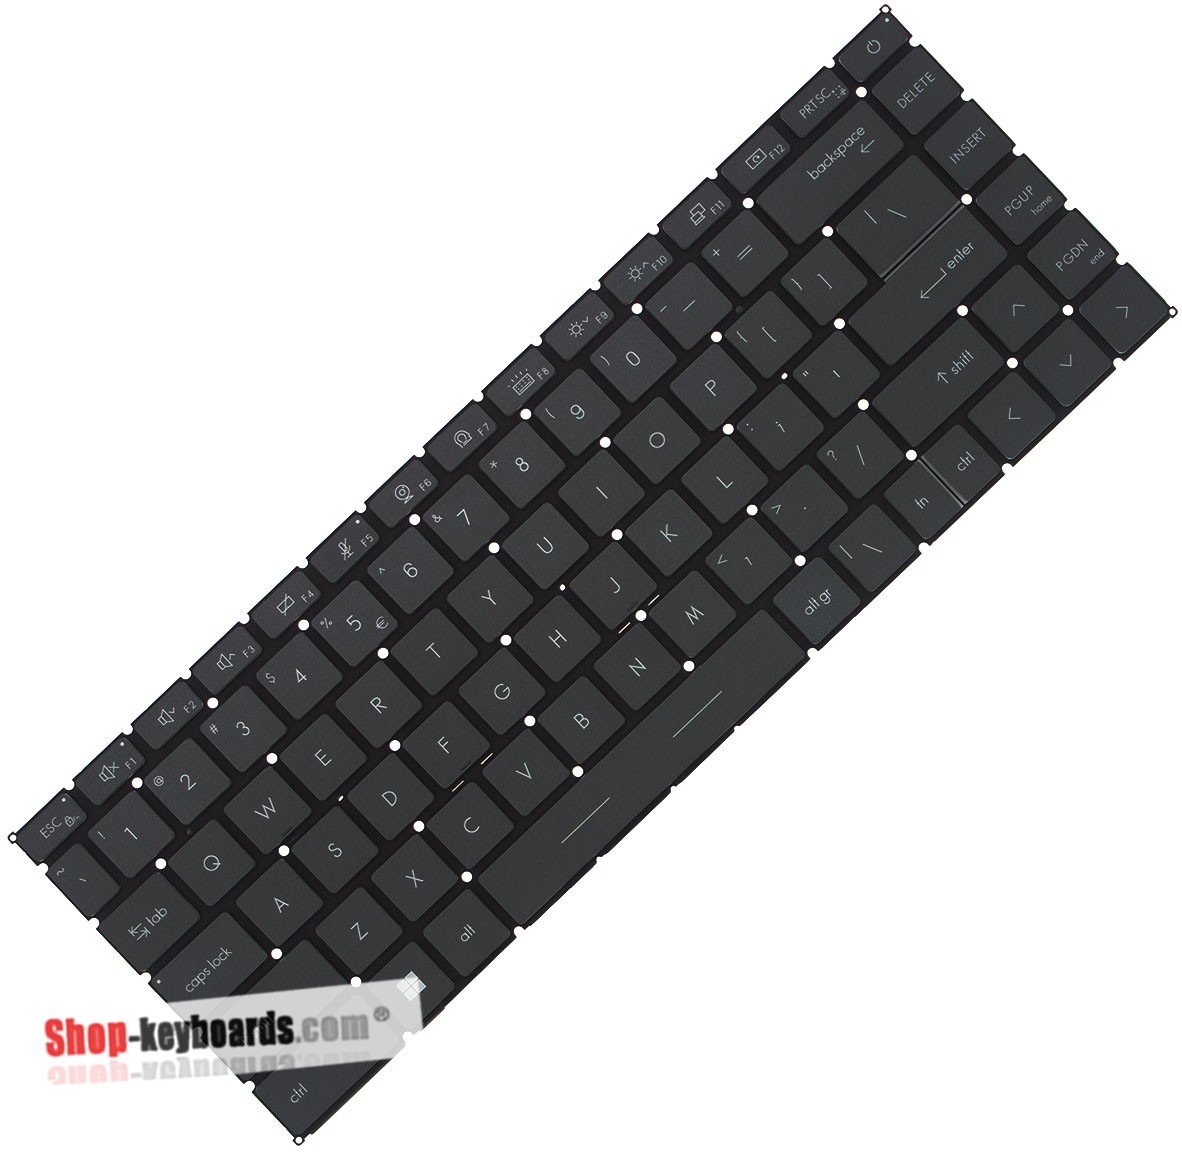 MSI WORKSTATION WS66 10TMT-207  Keyboard replacement